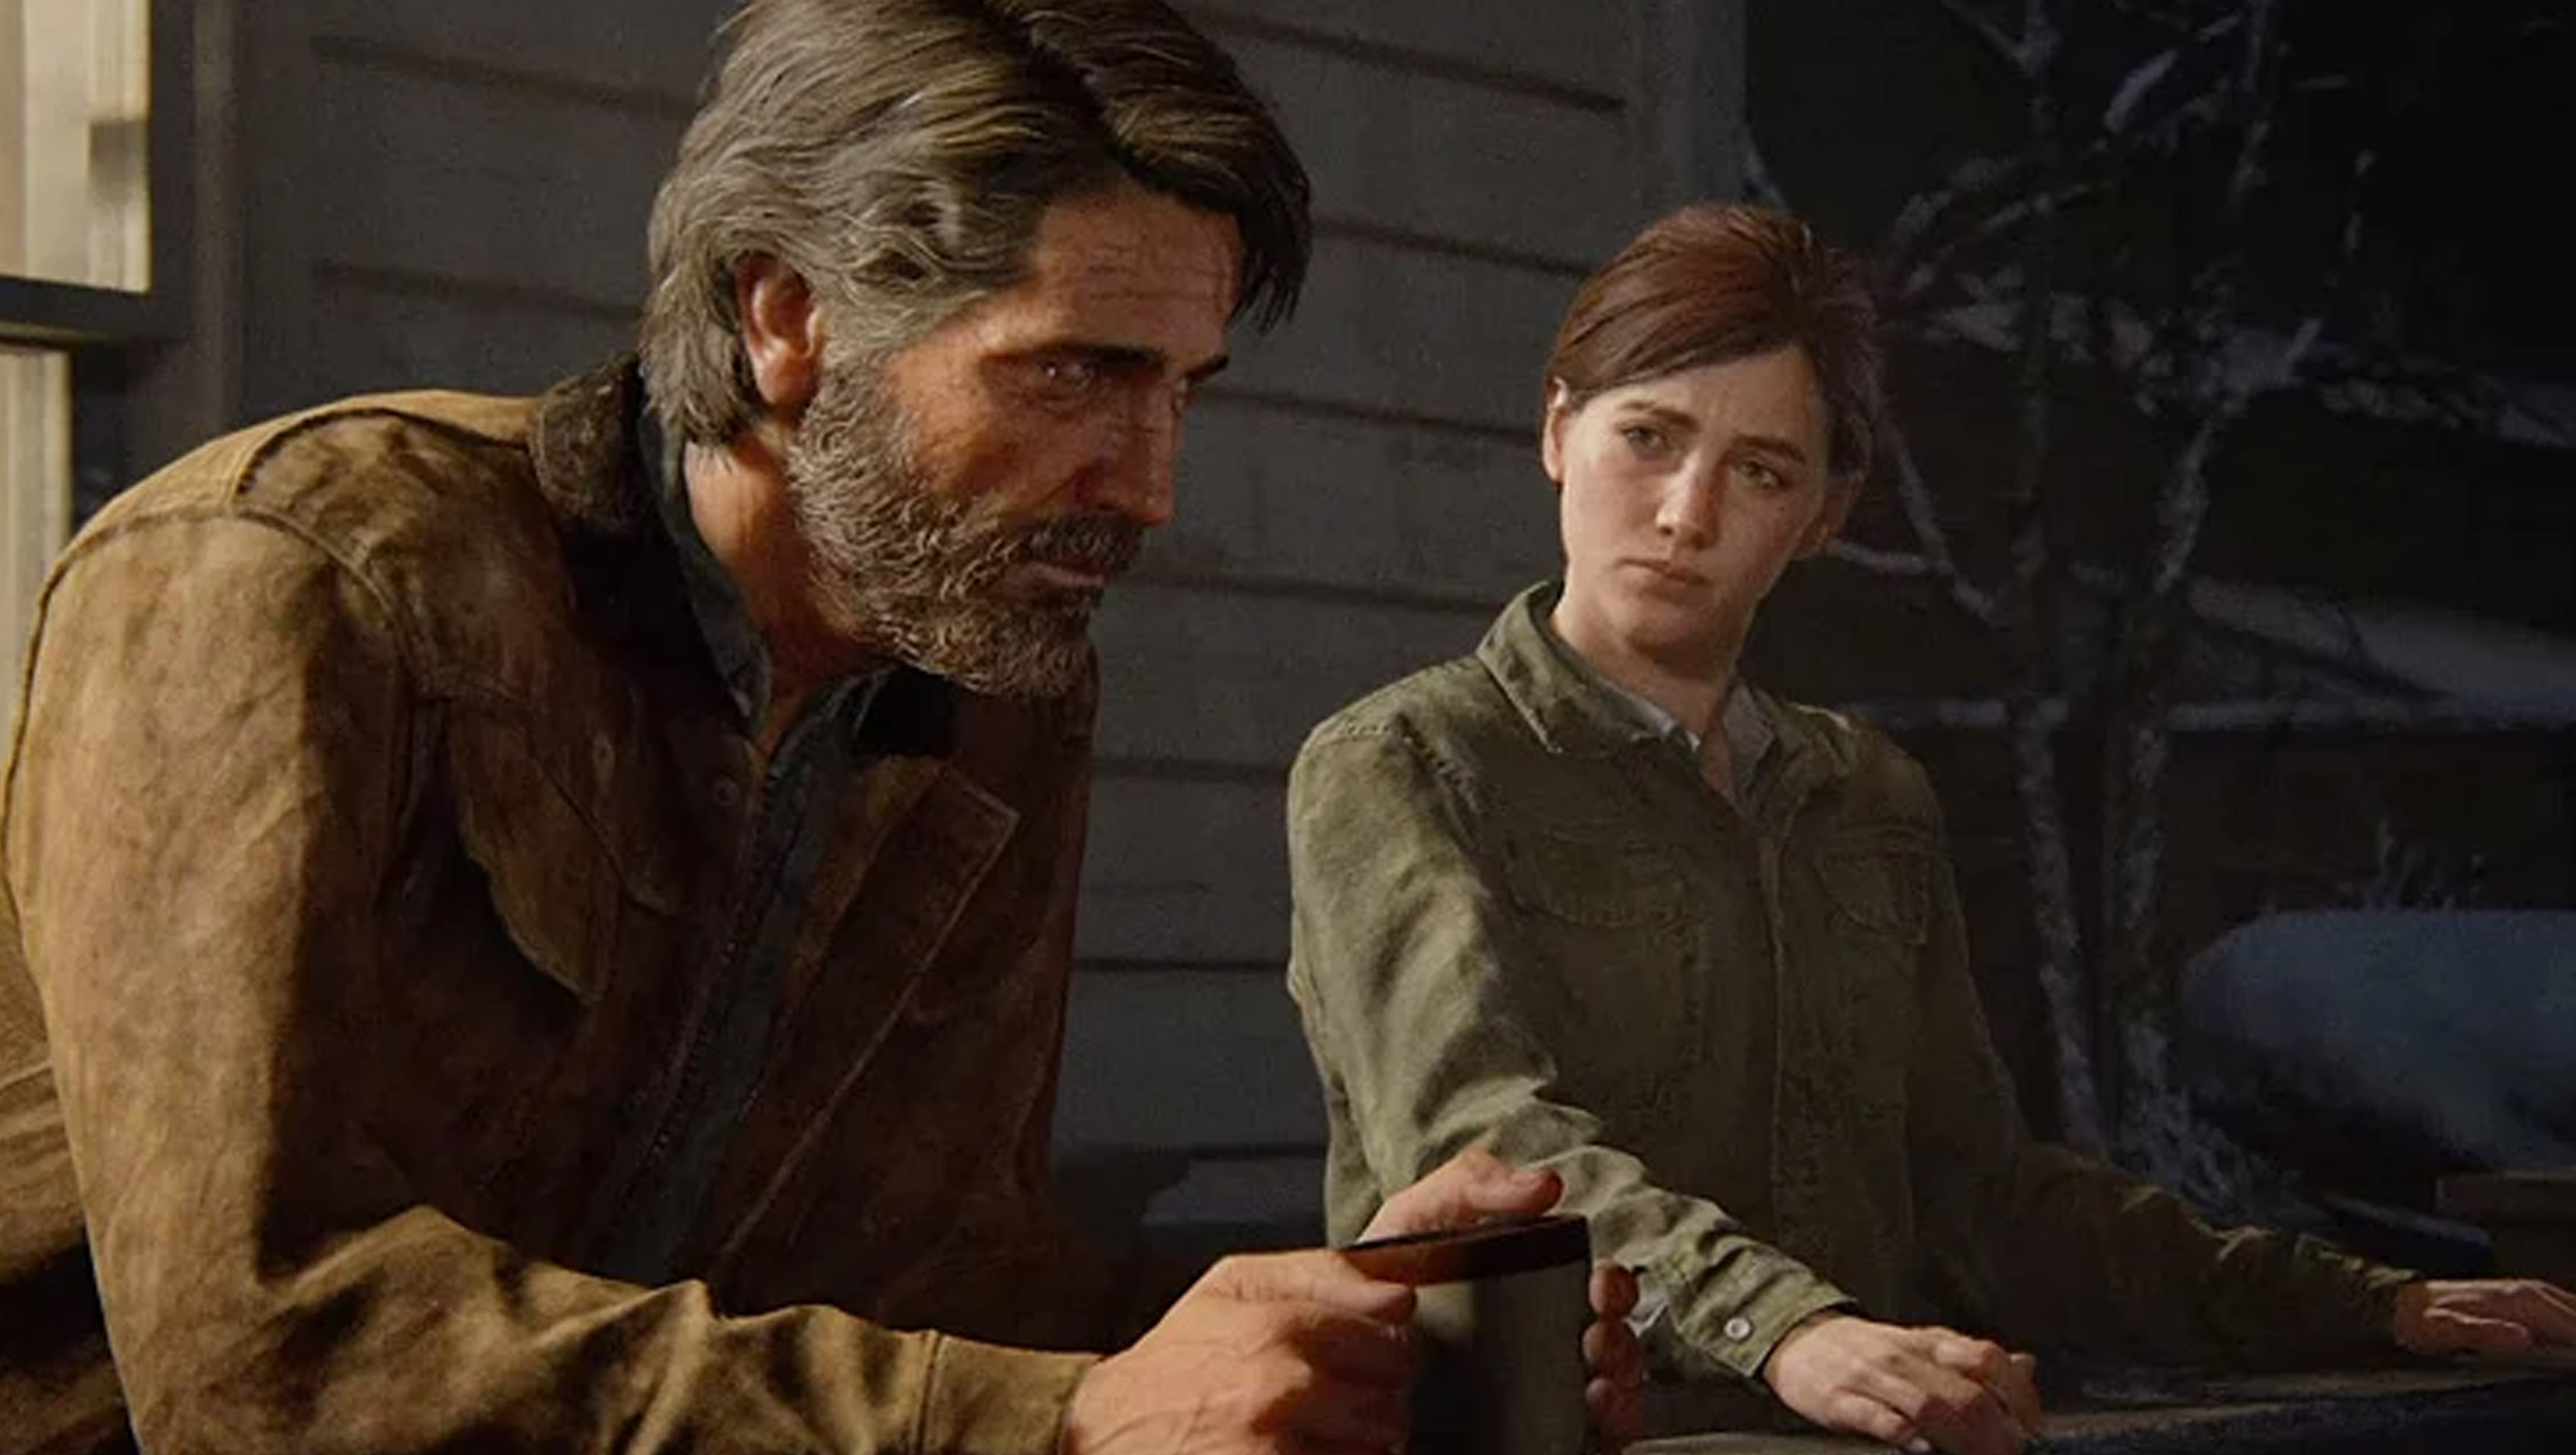 It s her again. Джоэл the last of us 2. Джоэл the last of us. Элли и Джоэл из the last of us 2.